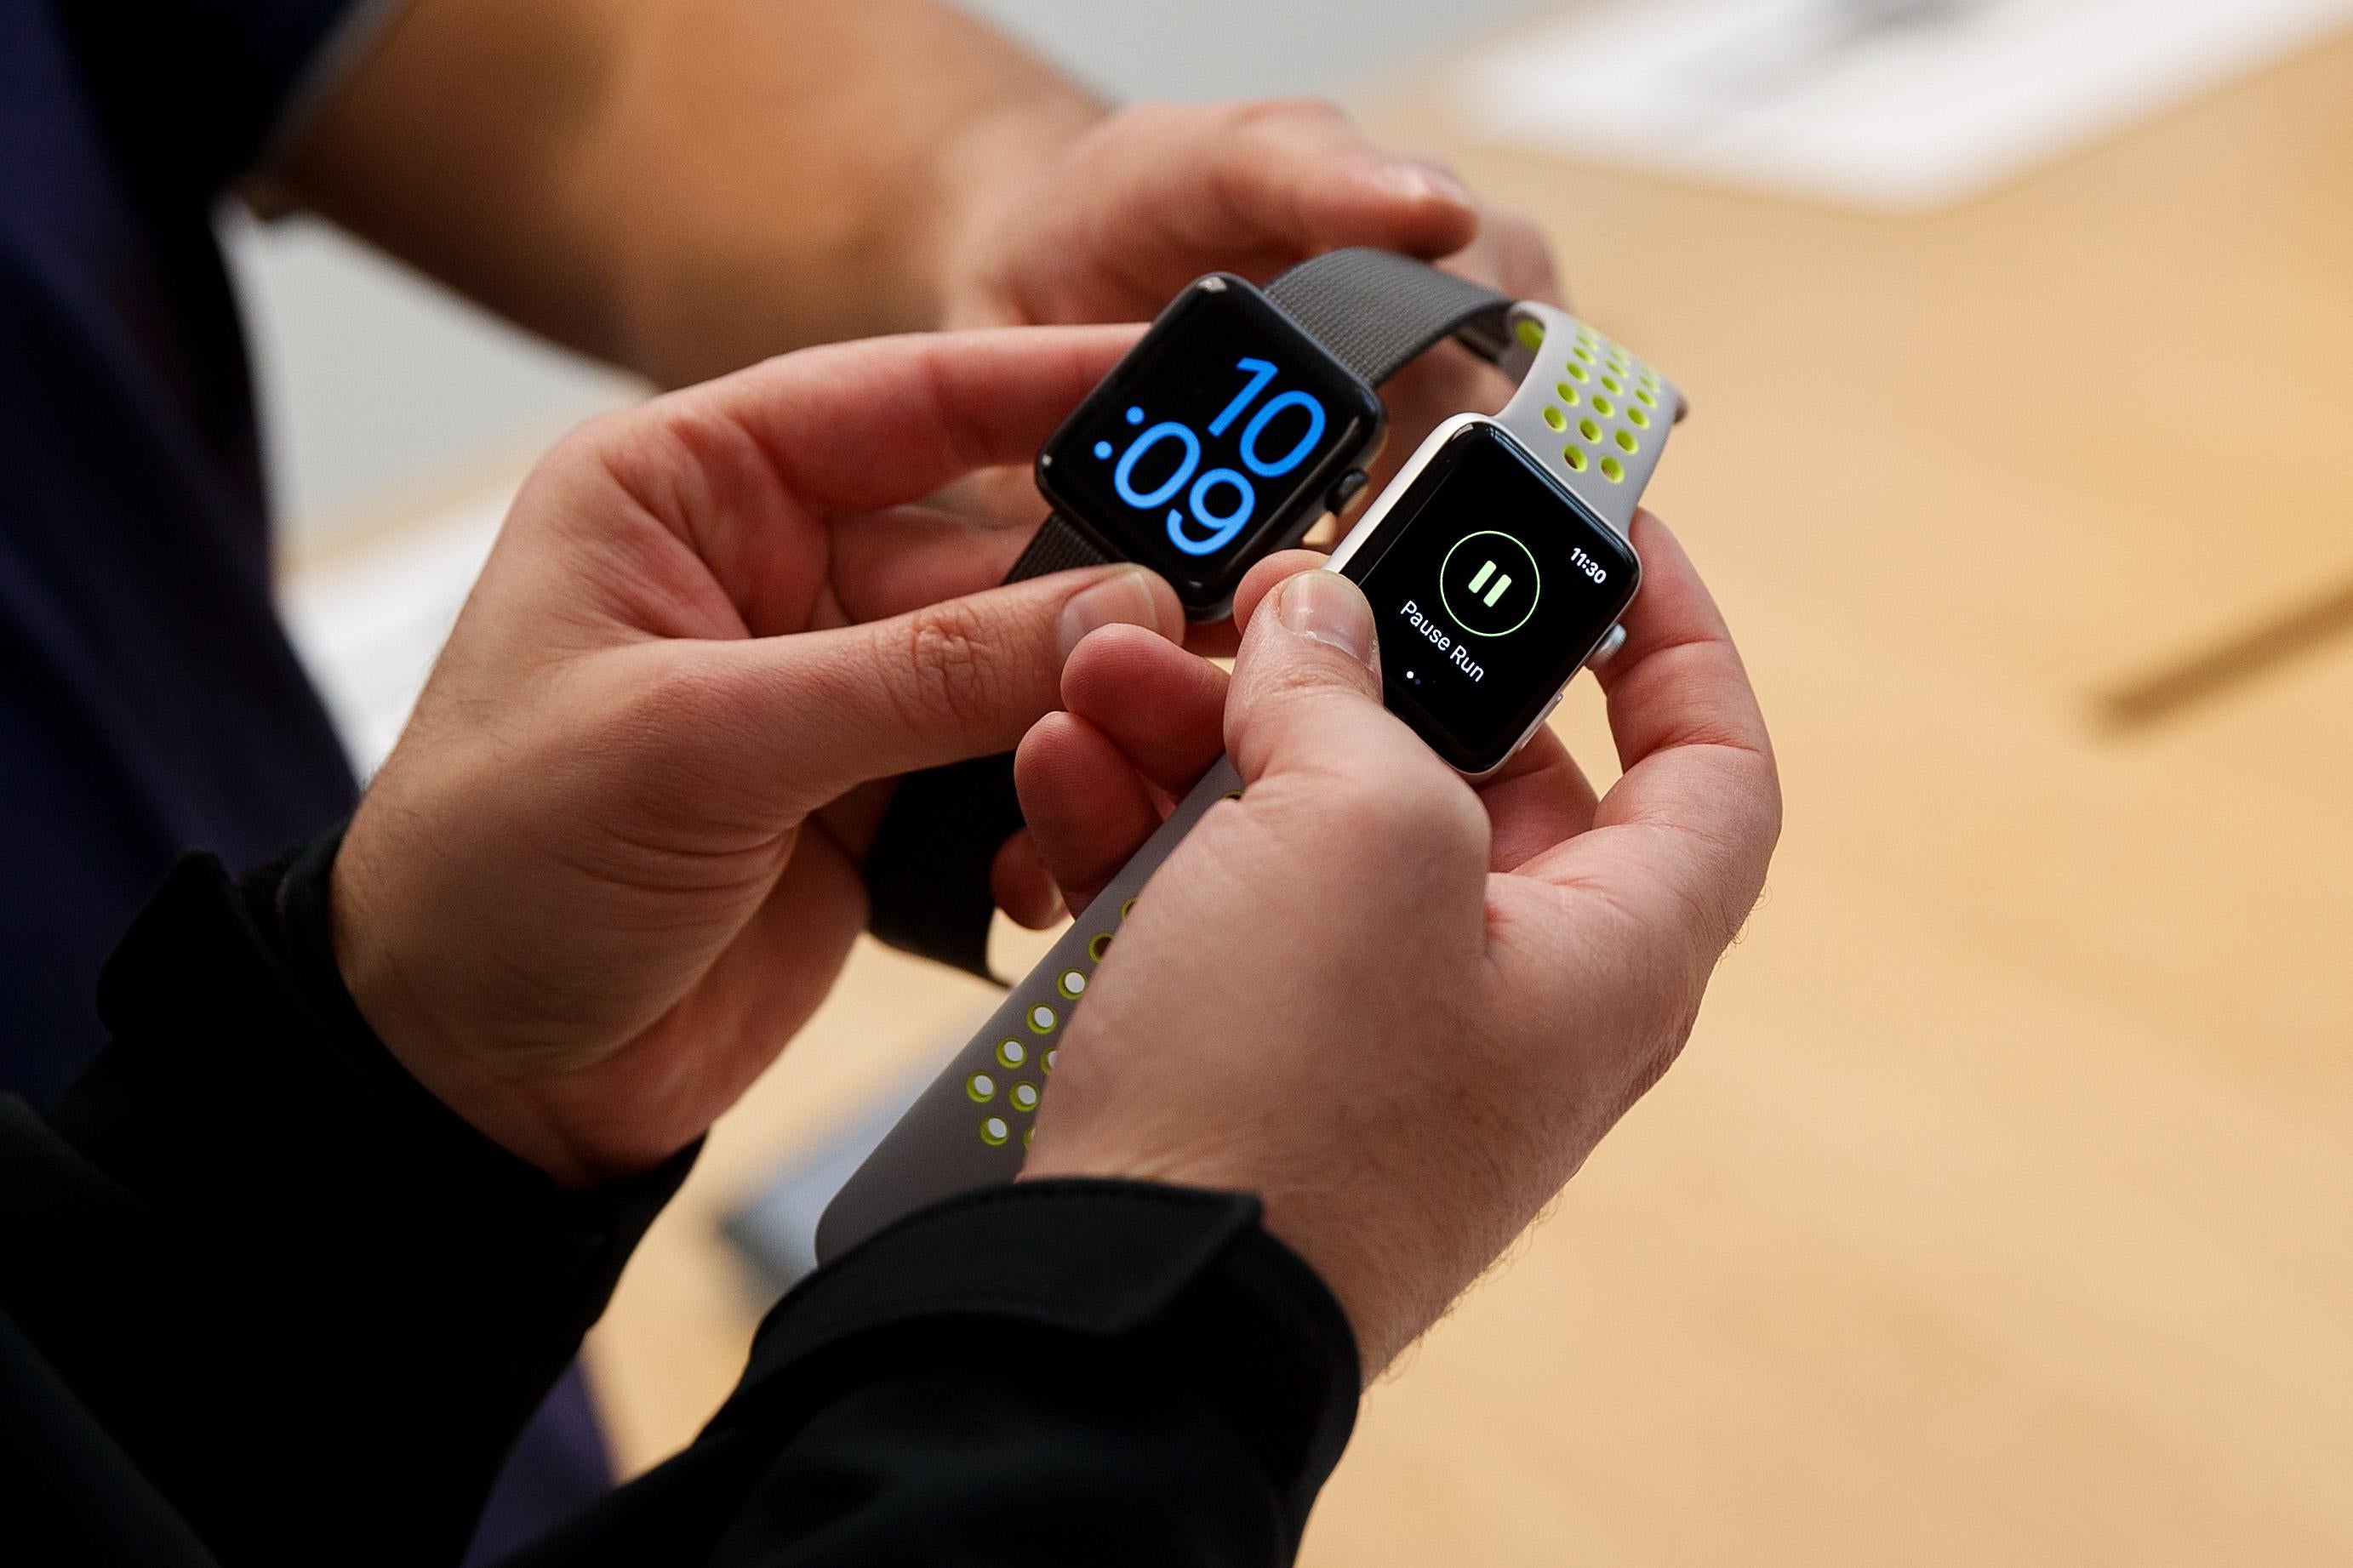 A customer looks at Apple Watch Nike+ at an Apple Store in the SoHo neighborhood of Manhattan, October 28, 2016 in New York City.